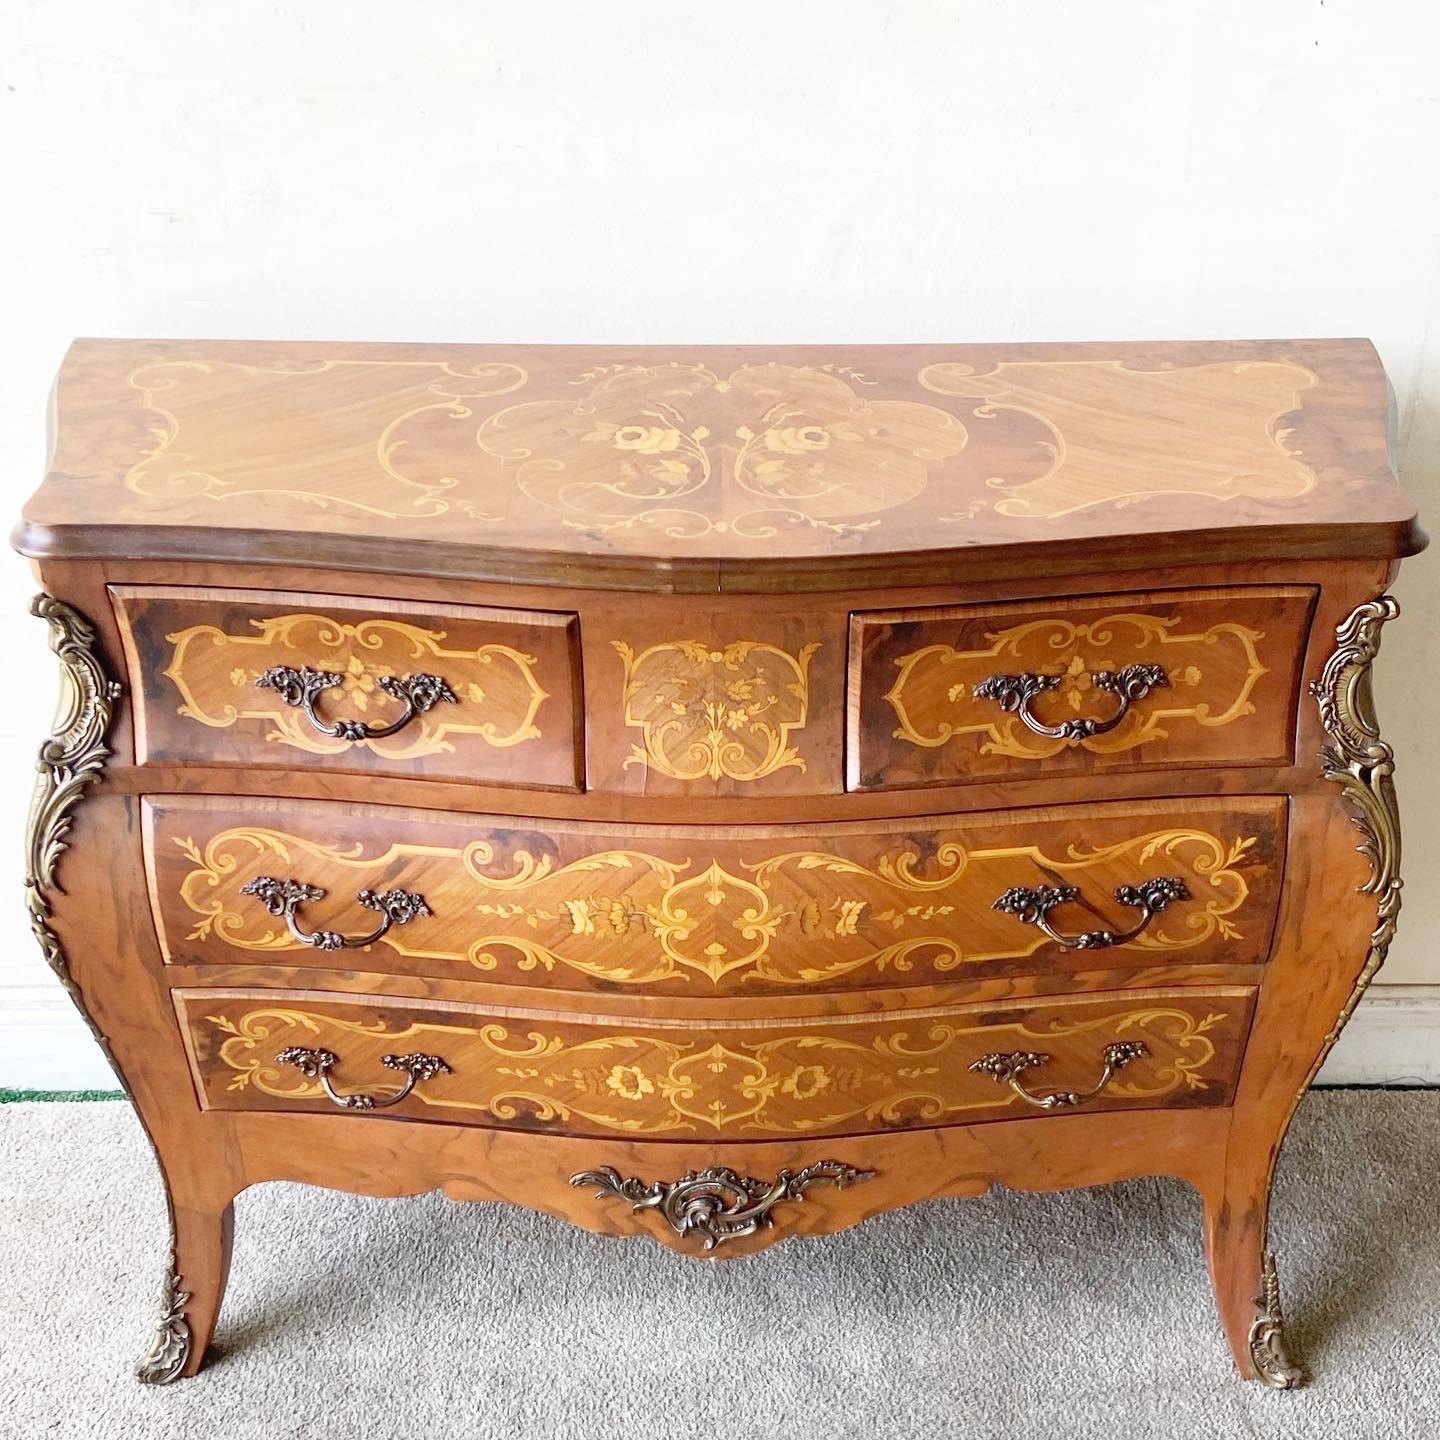 Exceptional Louis XV style, chest of drawers/commode. Wonderful brass ormolu accents and hardware. Two small drawers over two large drawers.
